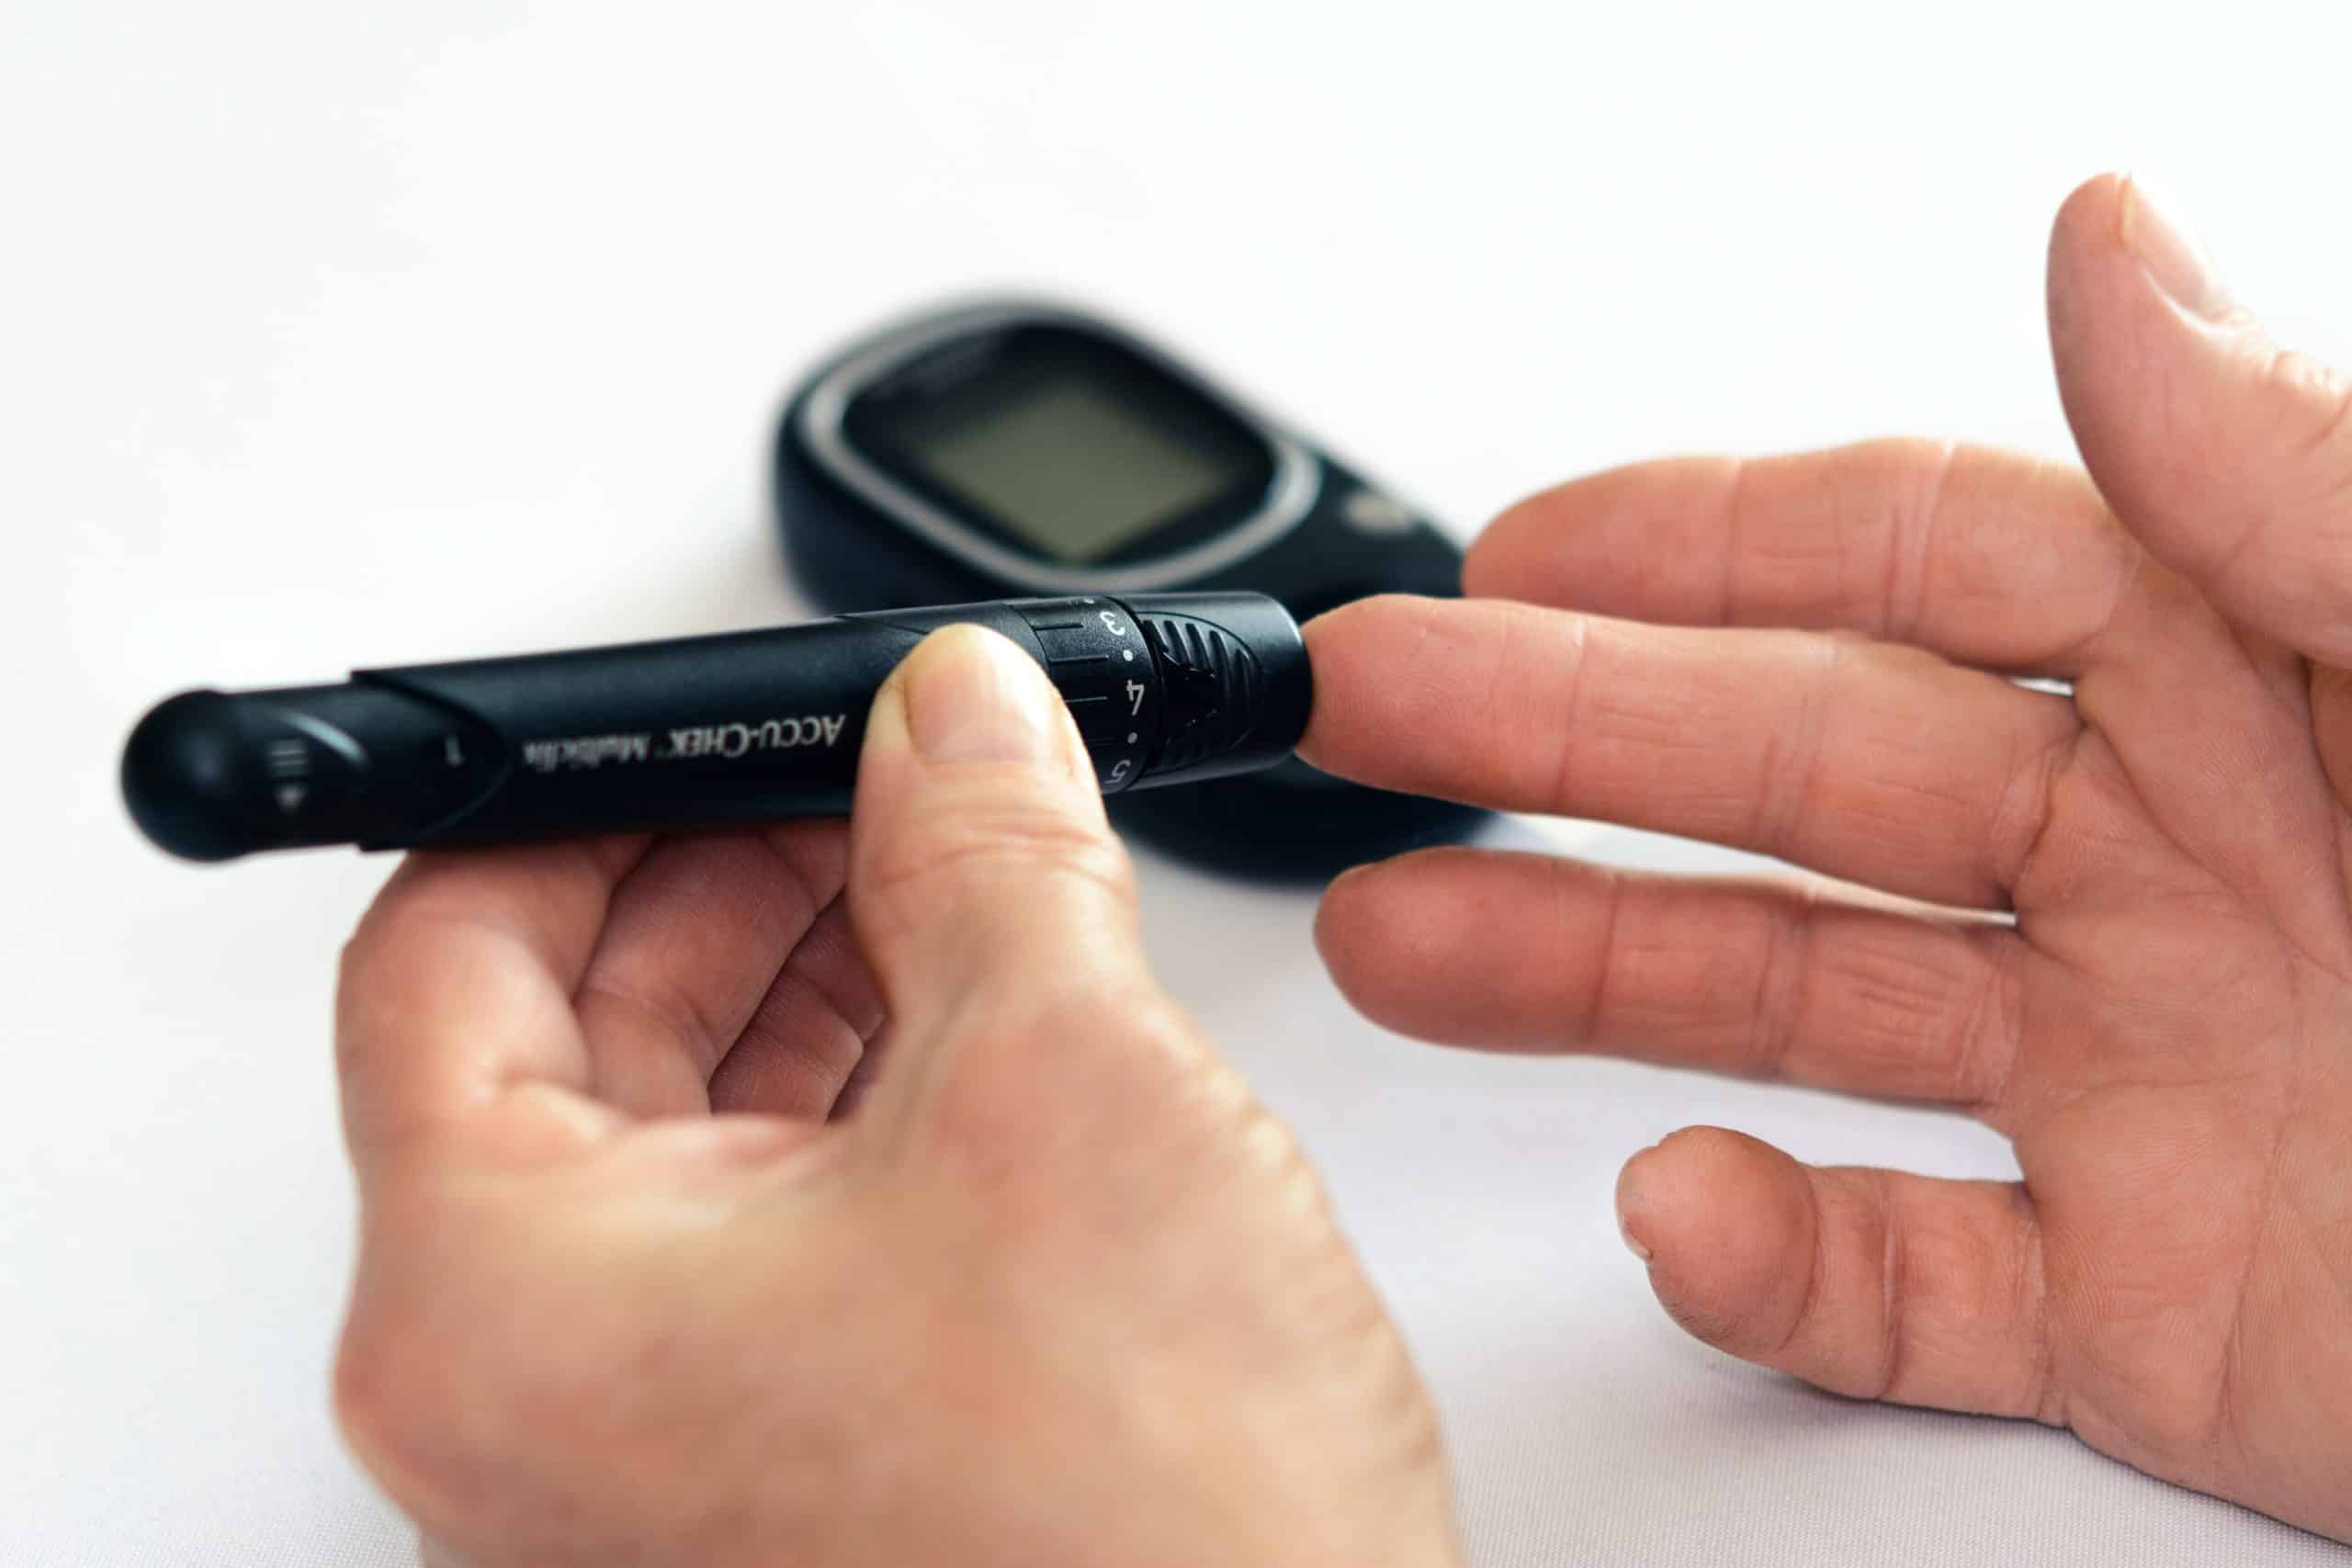 Report: Aussie adults with type 1 diabetes unable to access life-changing technology due to high cost